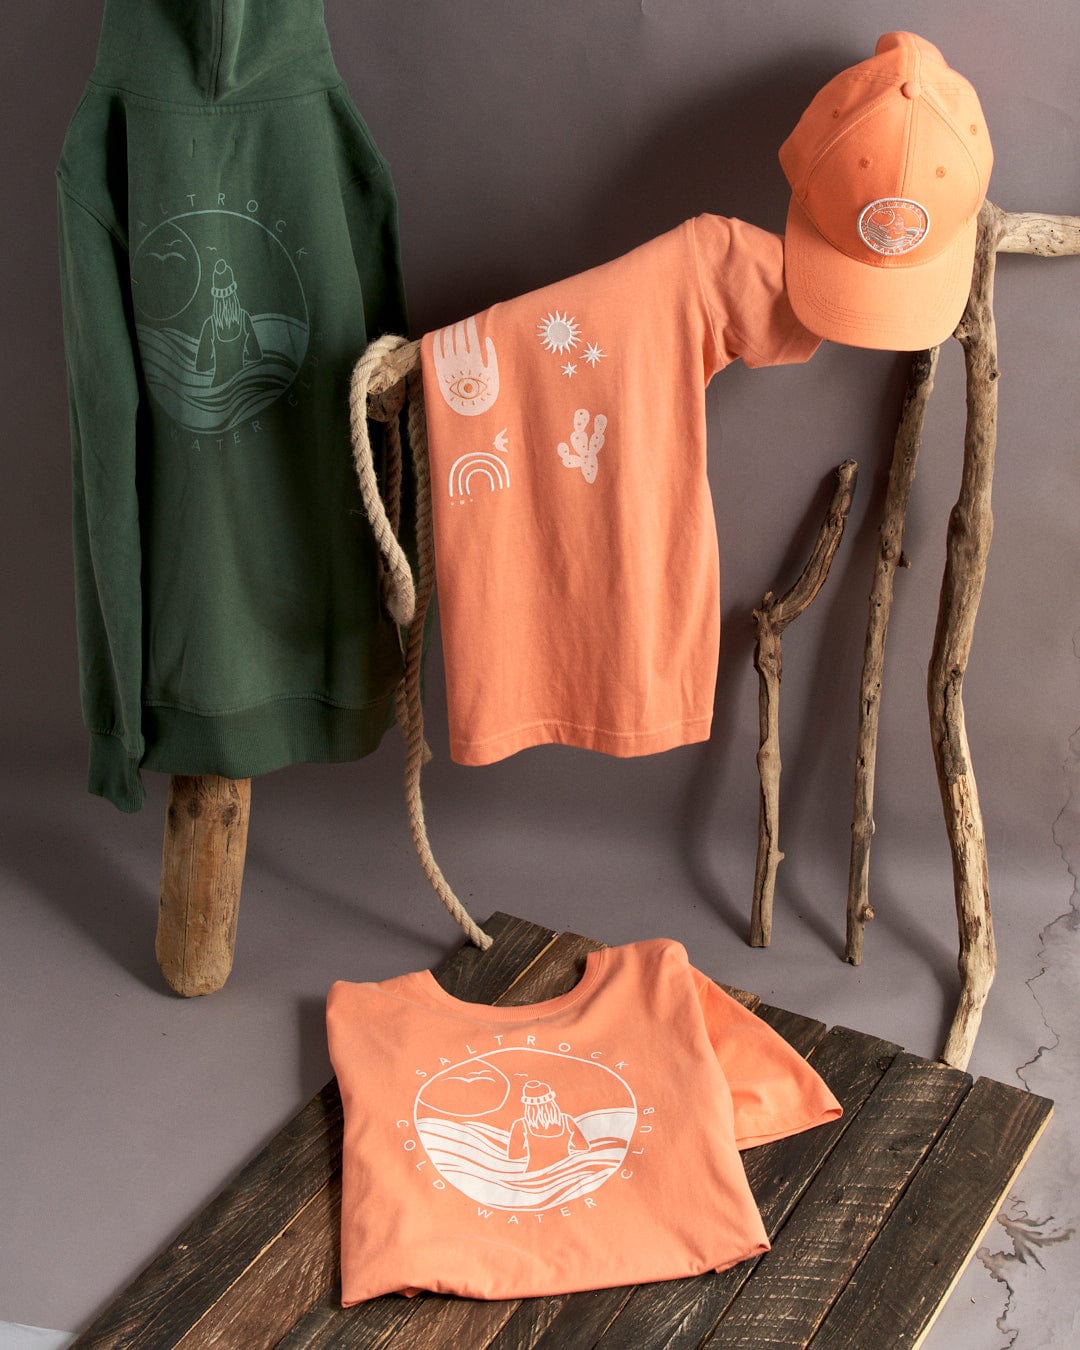 A Coldwater Club - Womens Short Sleeve T-Shirt (Peach), hat, and hoodie sitting on a wooden table.